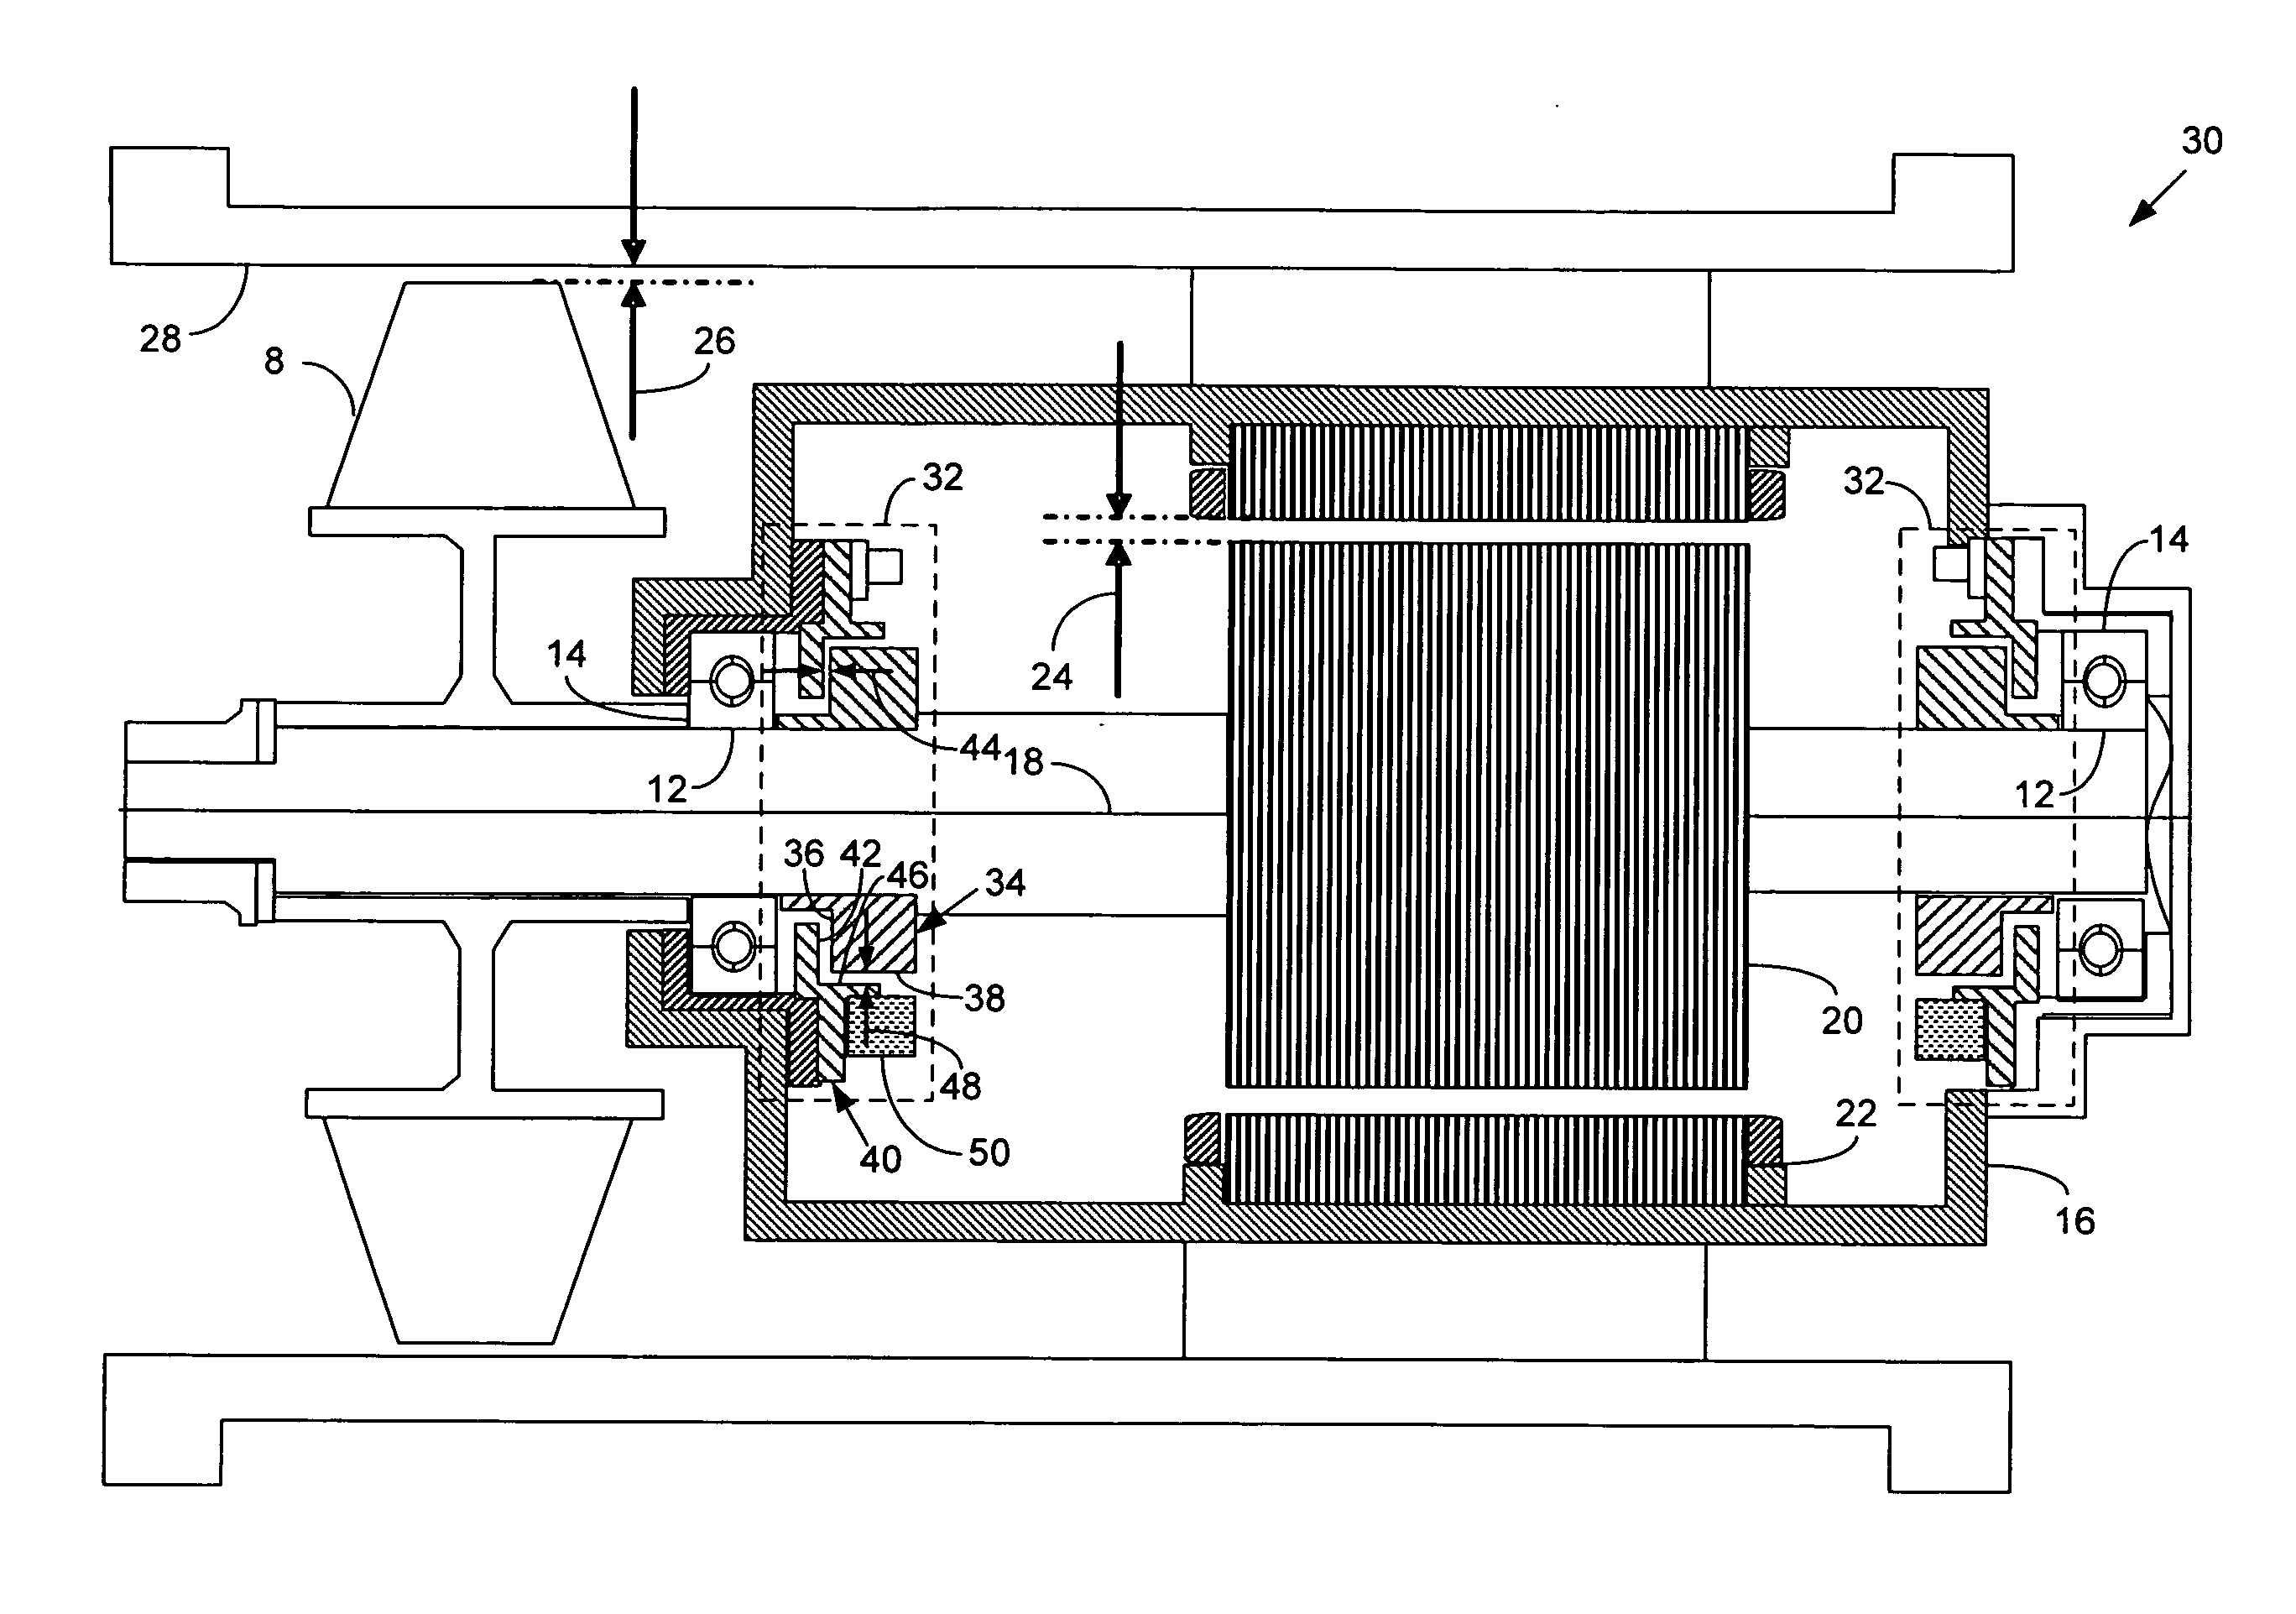 Auxiliary rotary bearing system